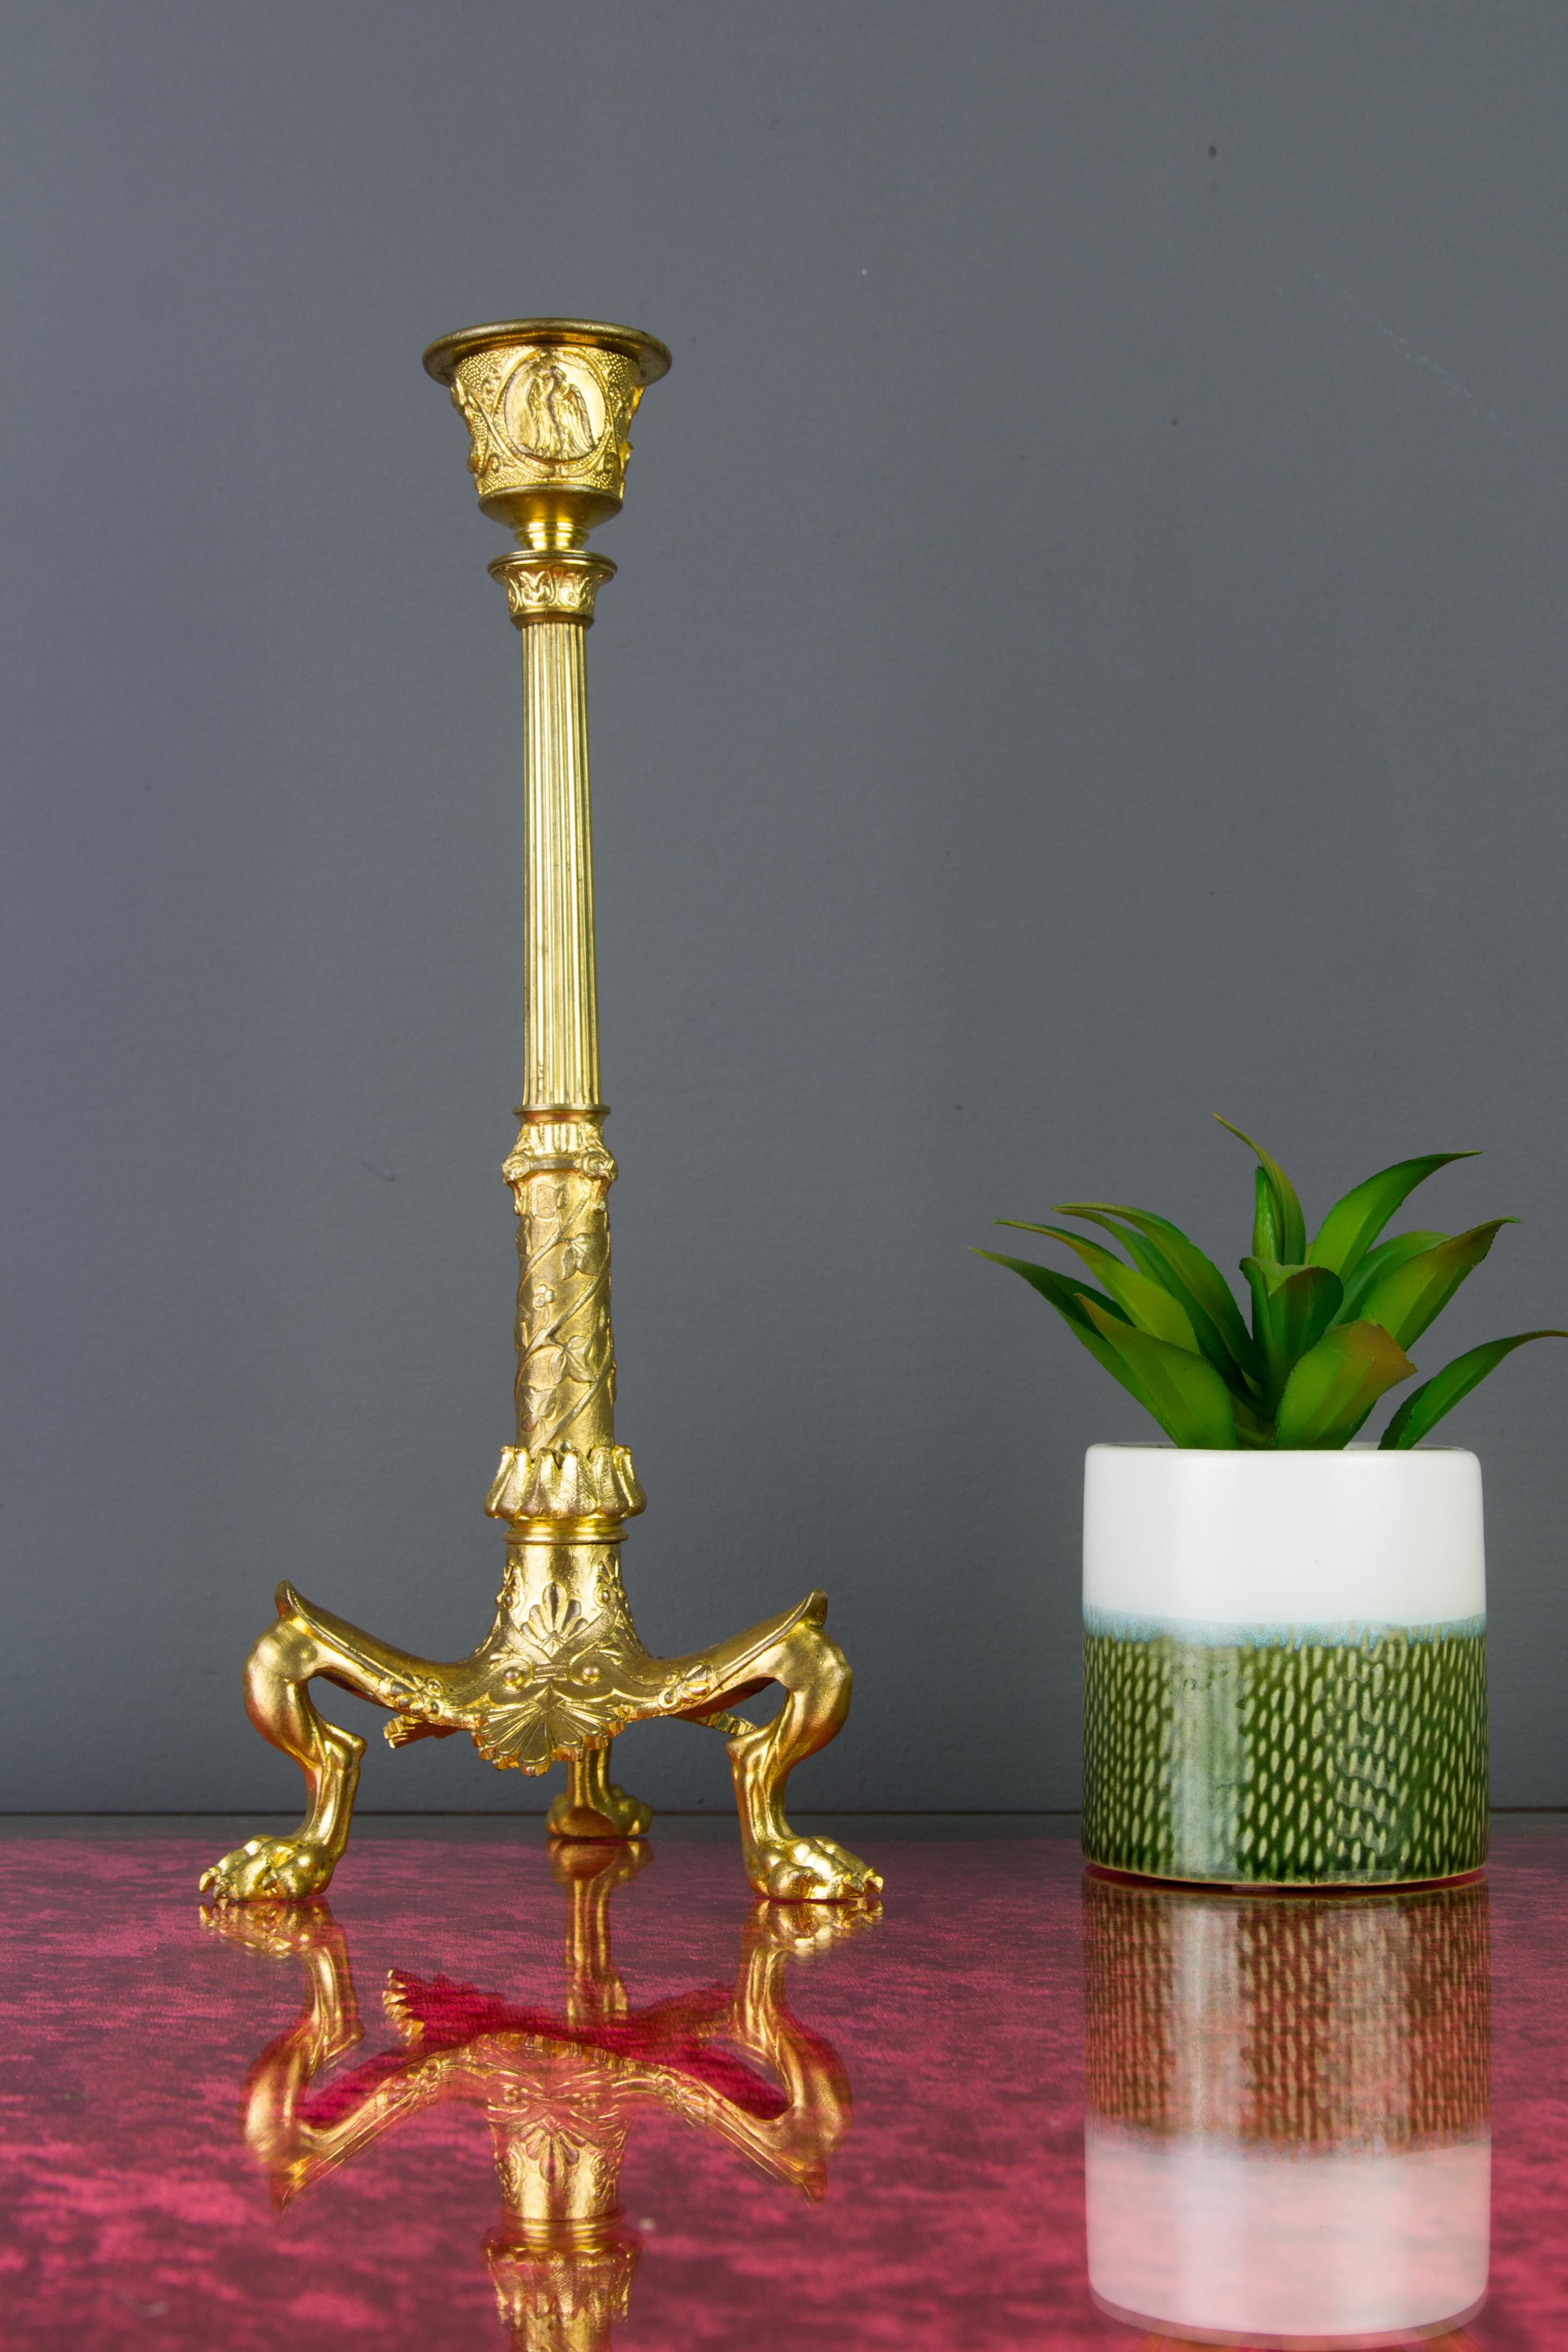 Fine French Empire style gilt bronze candleholder from the Napoleon III period. A fluted column beautifully decorated with Ivy rises on a tripod with claw-shaped paw feet. This antique candleholder features typical Empire style décors with spears